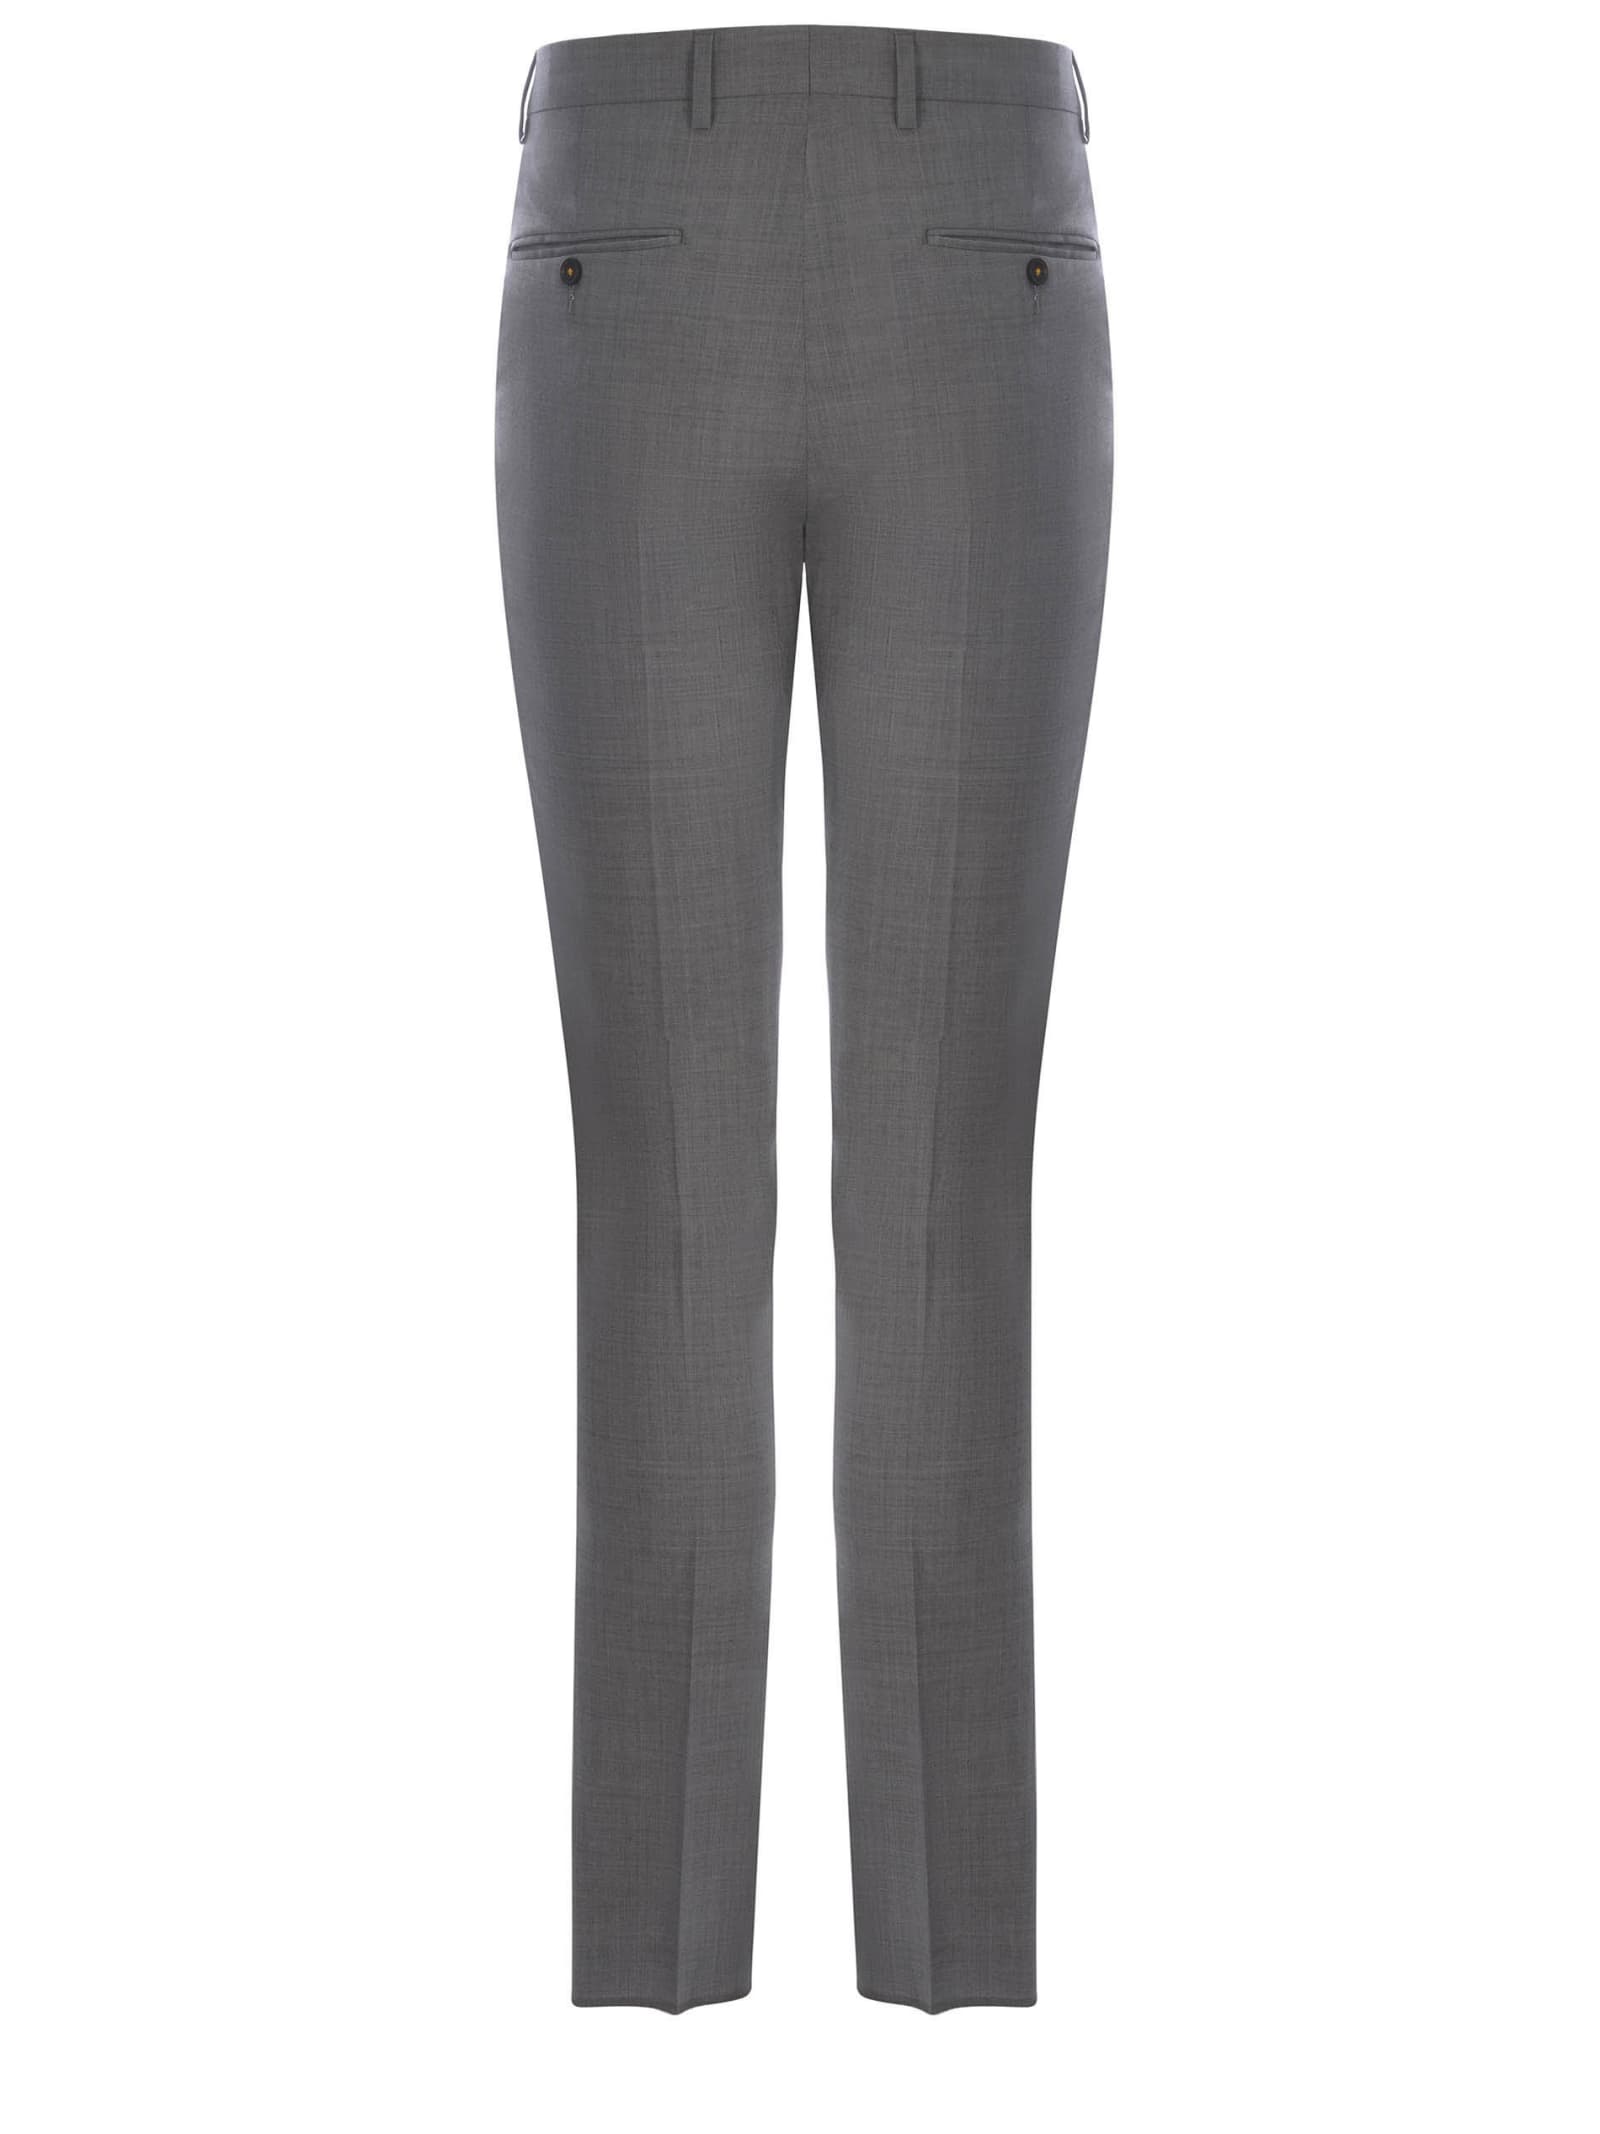 Shop Manuel Ritz Trousers  Made Of Wool Canvas In Grey